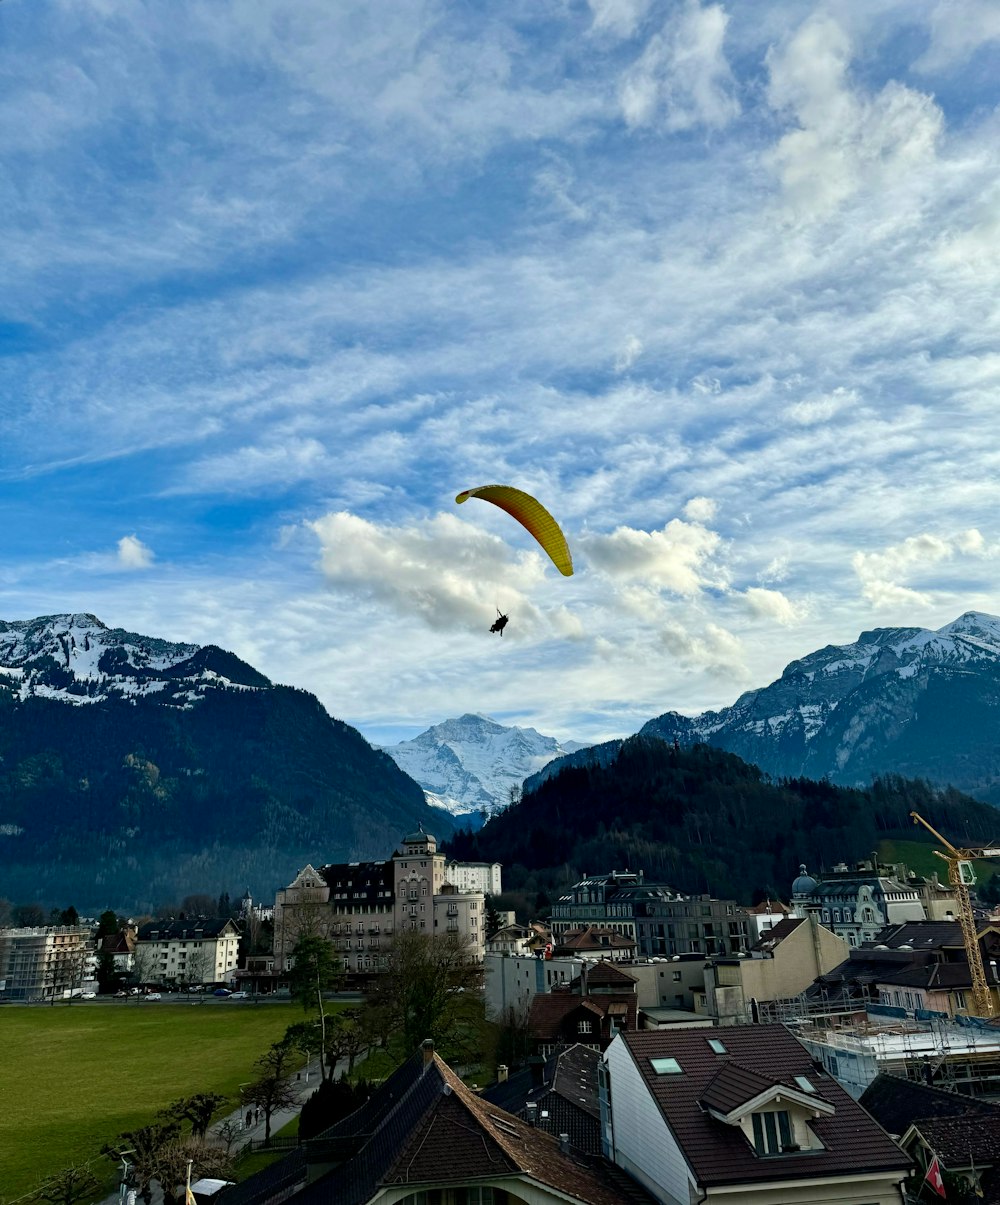 a kite flying over a city with mountains in the background